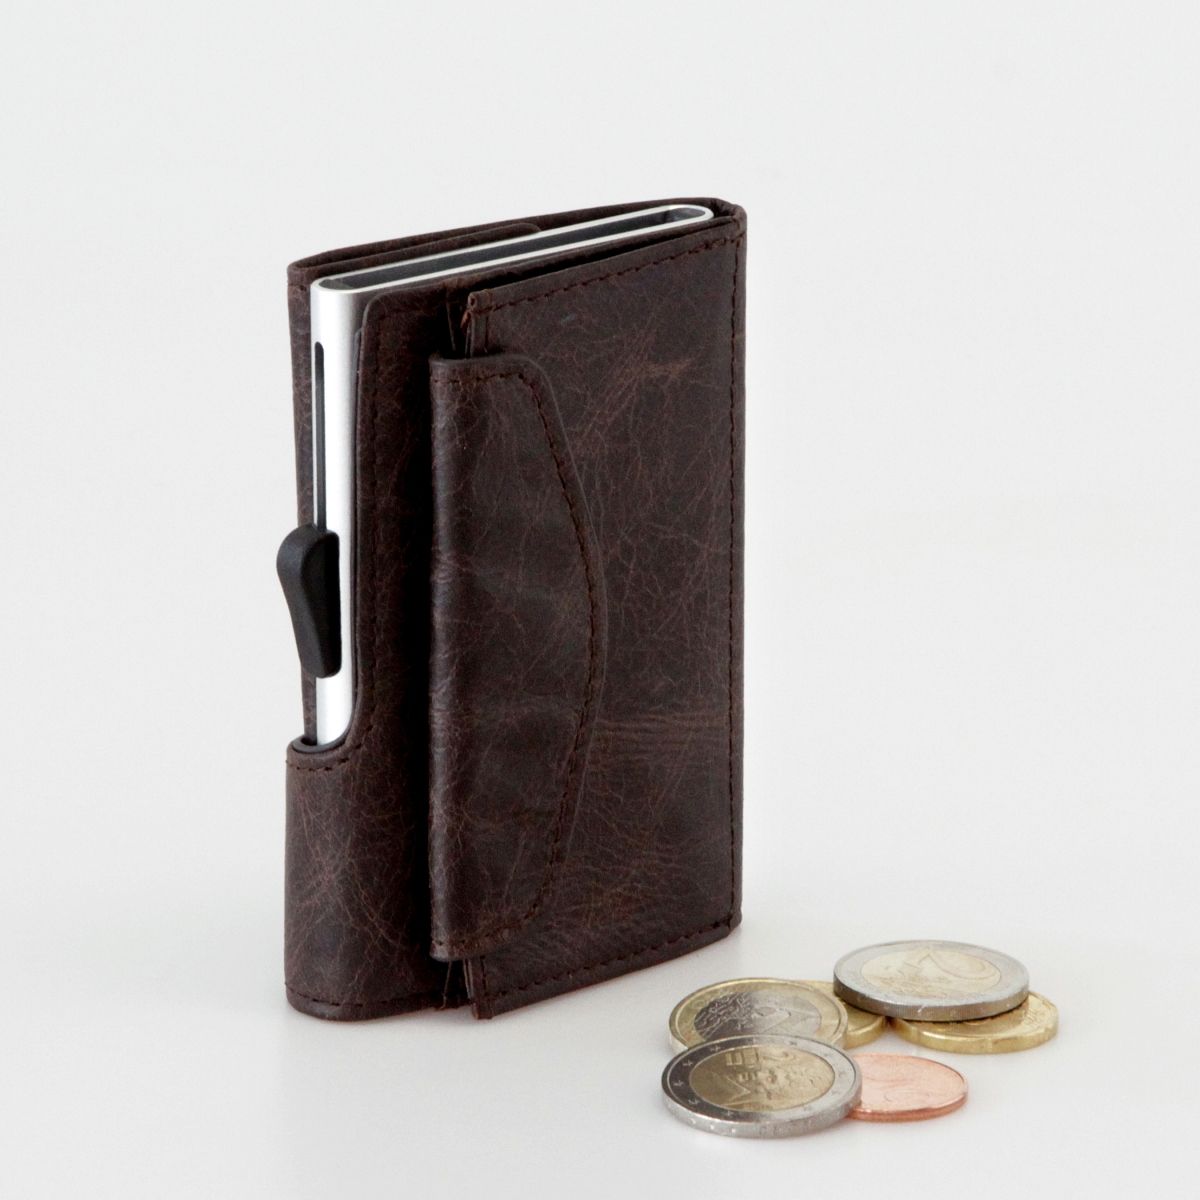 Aluminum Card Holder with PU Leather with Coin Pouch - Dark Brown